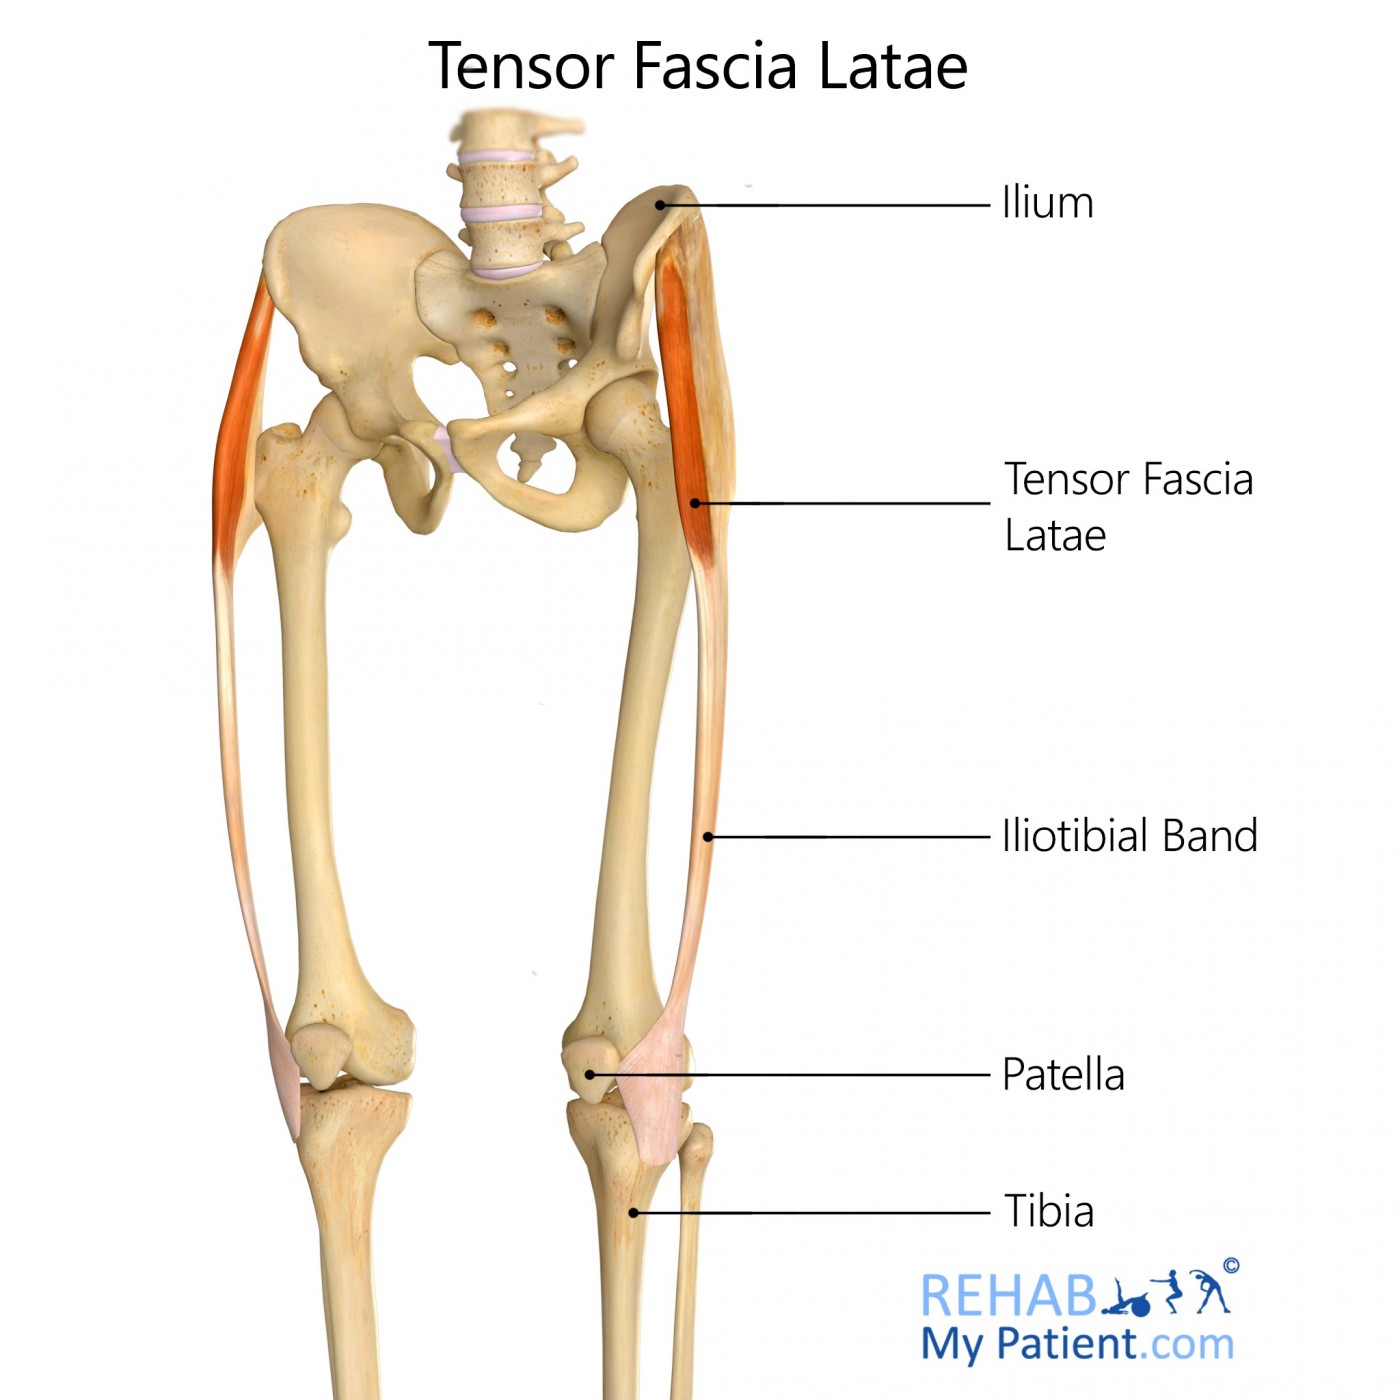 a) Where is the tensor fasciae latae located? (b) Explain its action.